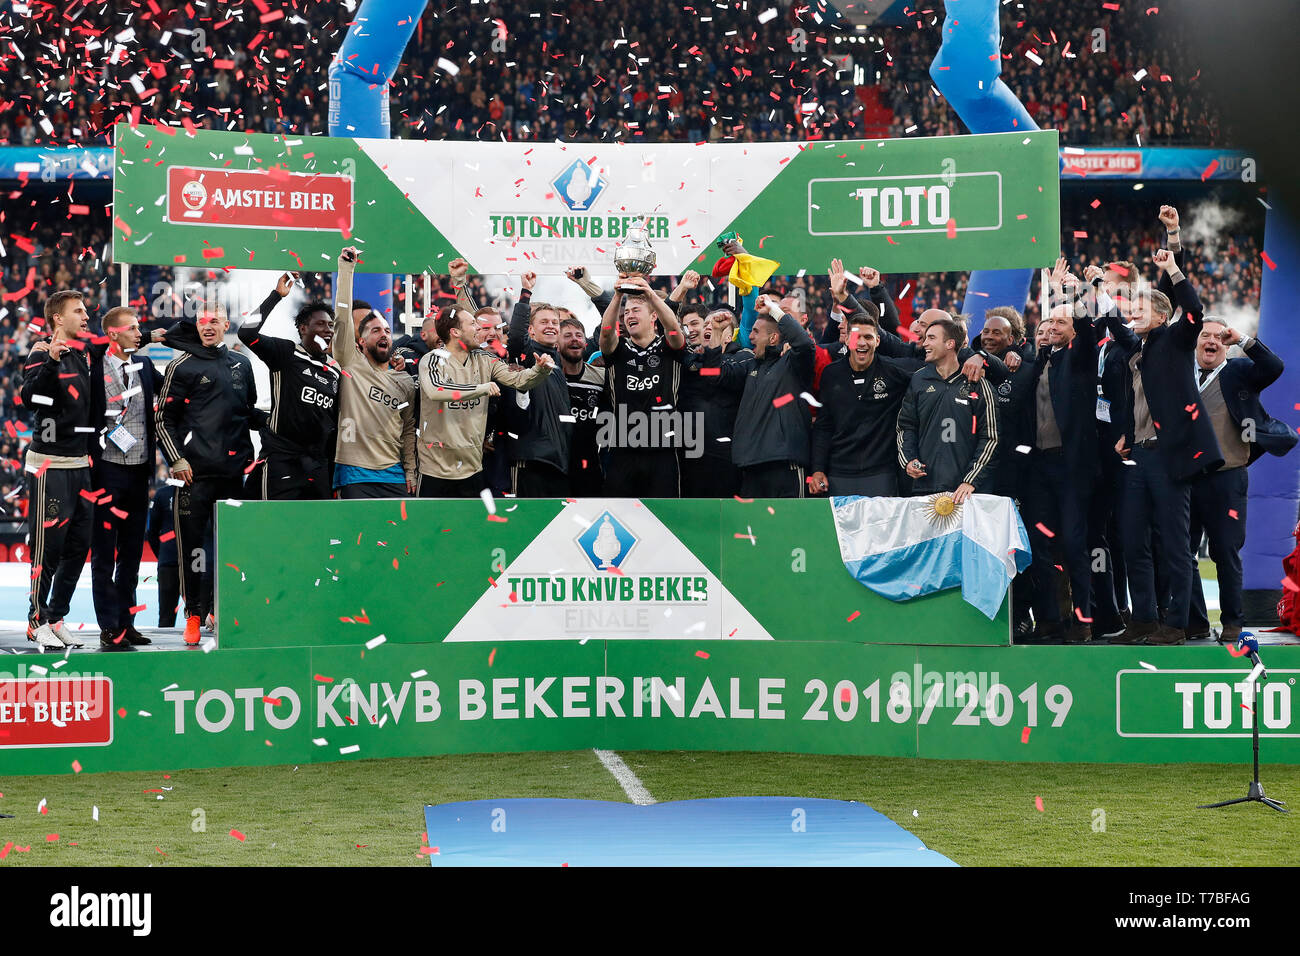 Rotterdam, Netherlands. 05th May, 2019. ROTTERDAM, 05-05-2019 Stadium de  Kuip, Season 2018/2019 Dutch Cup Final for the KNVB beker, Ajax player  Matthijs de Ligt lifting the cup during the game Willem II -